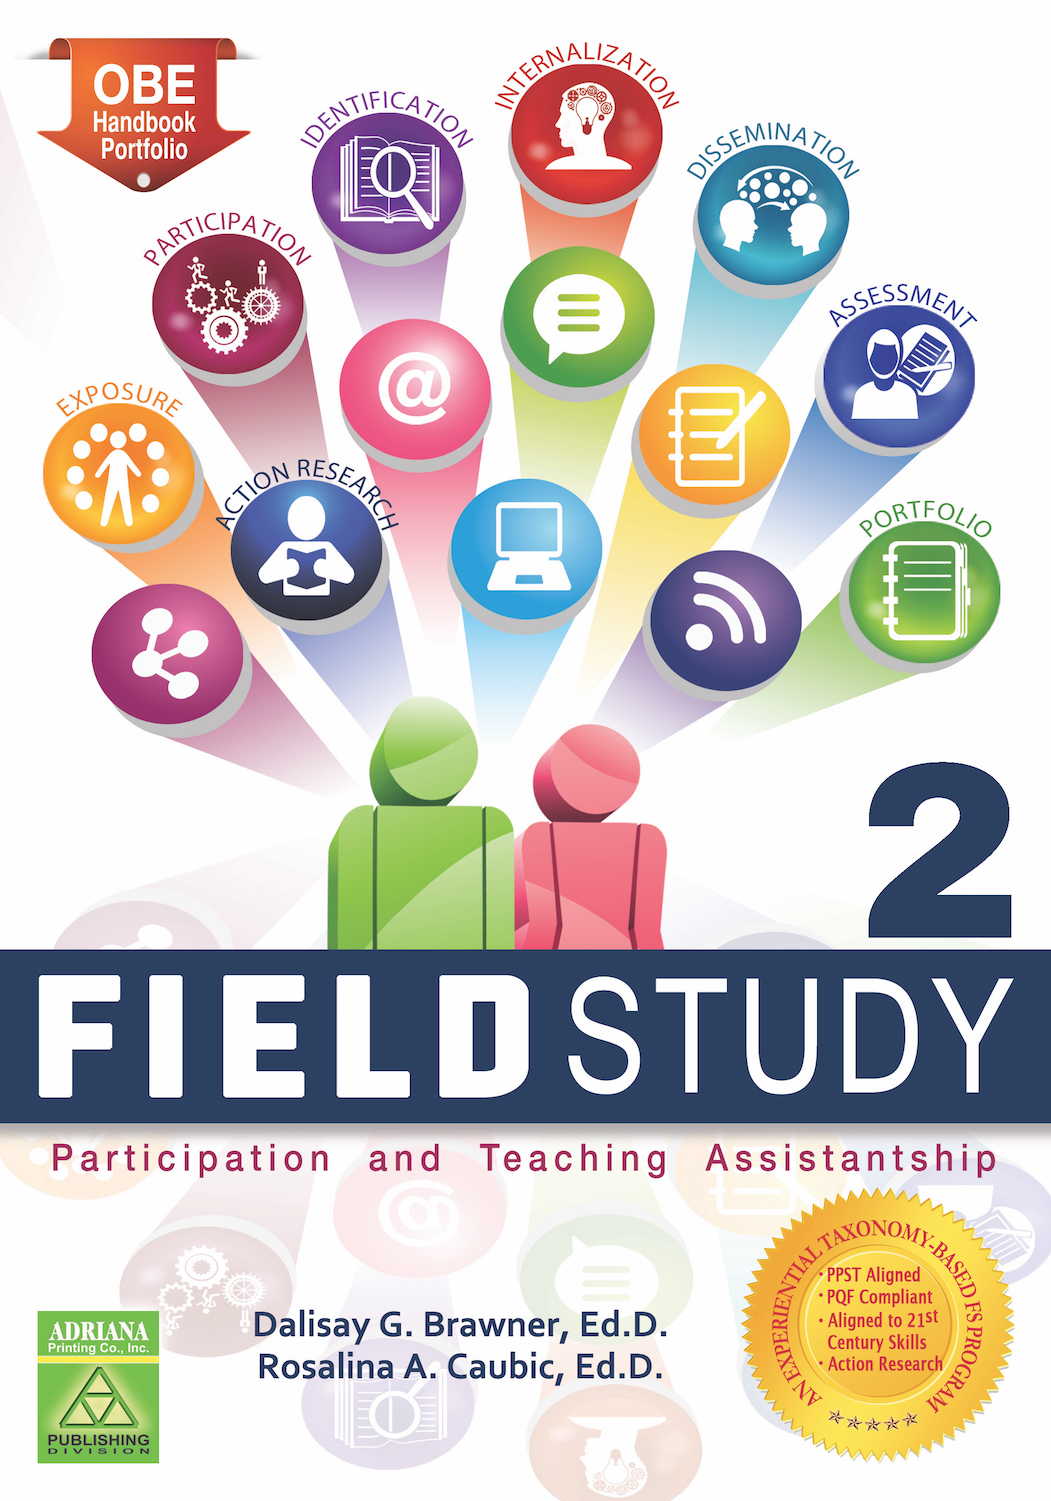 action research field study 2